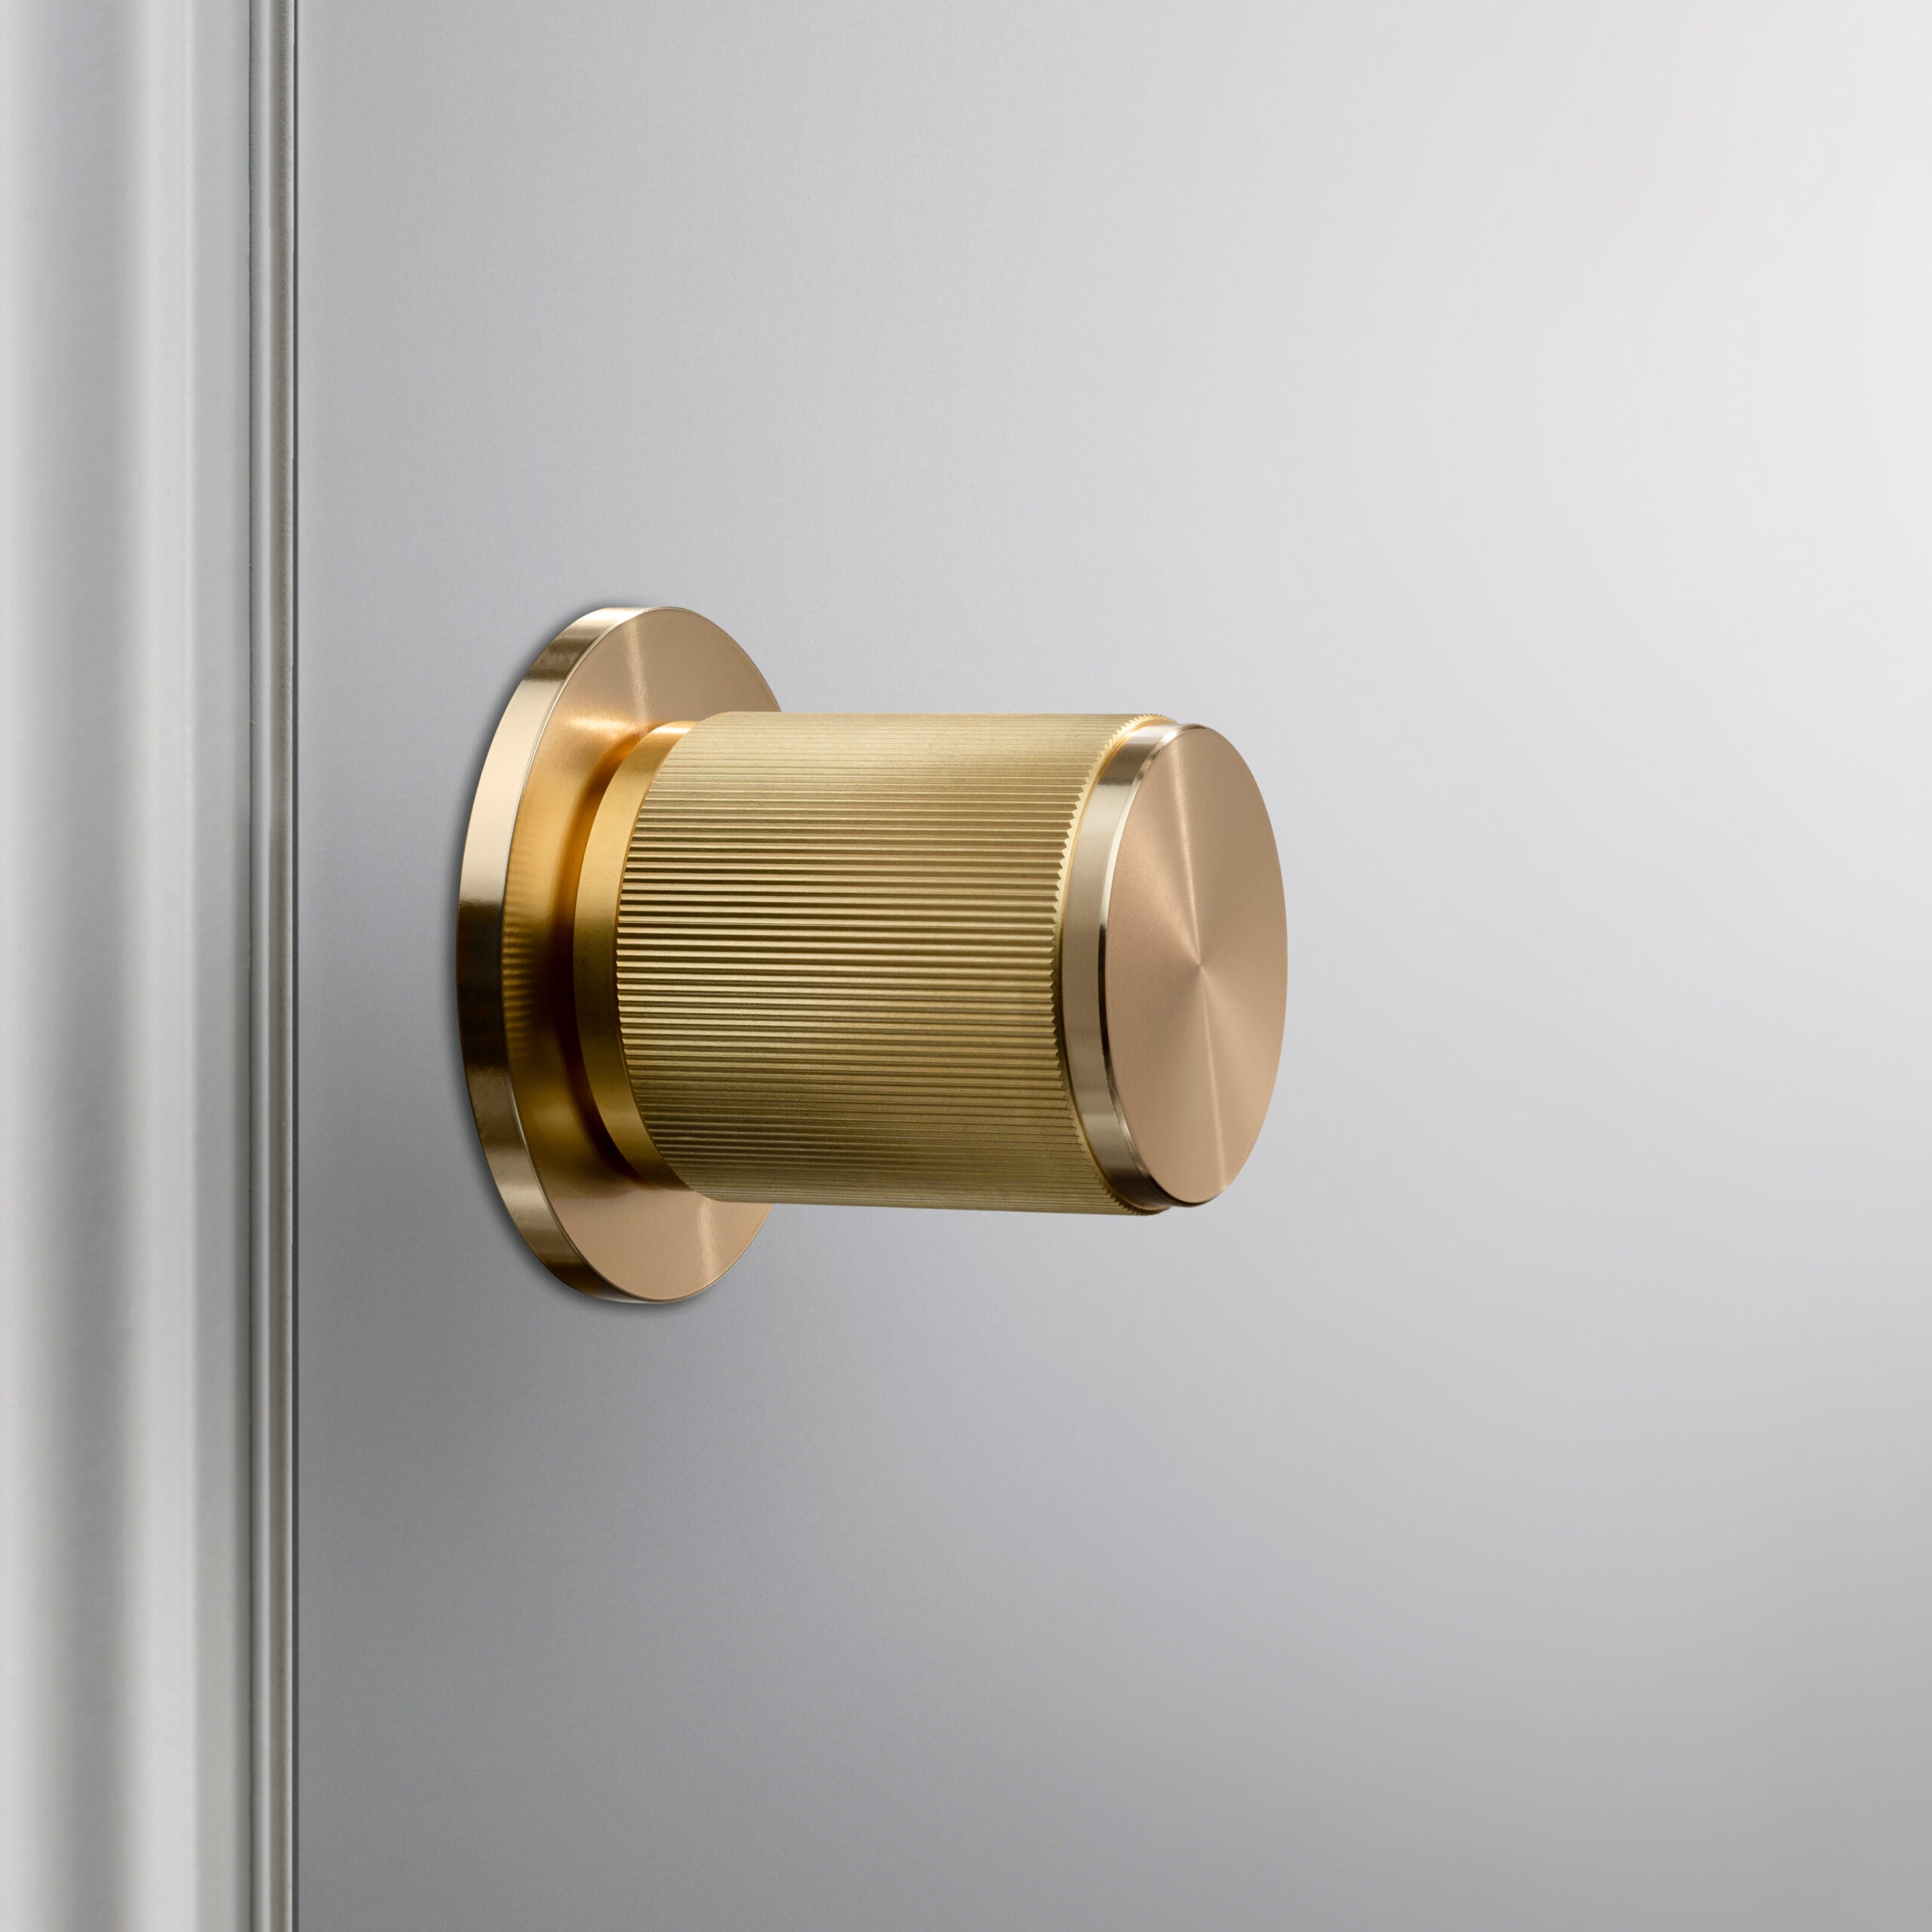 Buster + Punch Door Knob Single Sided, Linear Design, FIXED TYPE Hardware Buster + Punch   